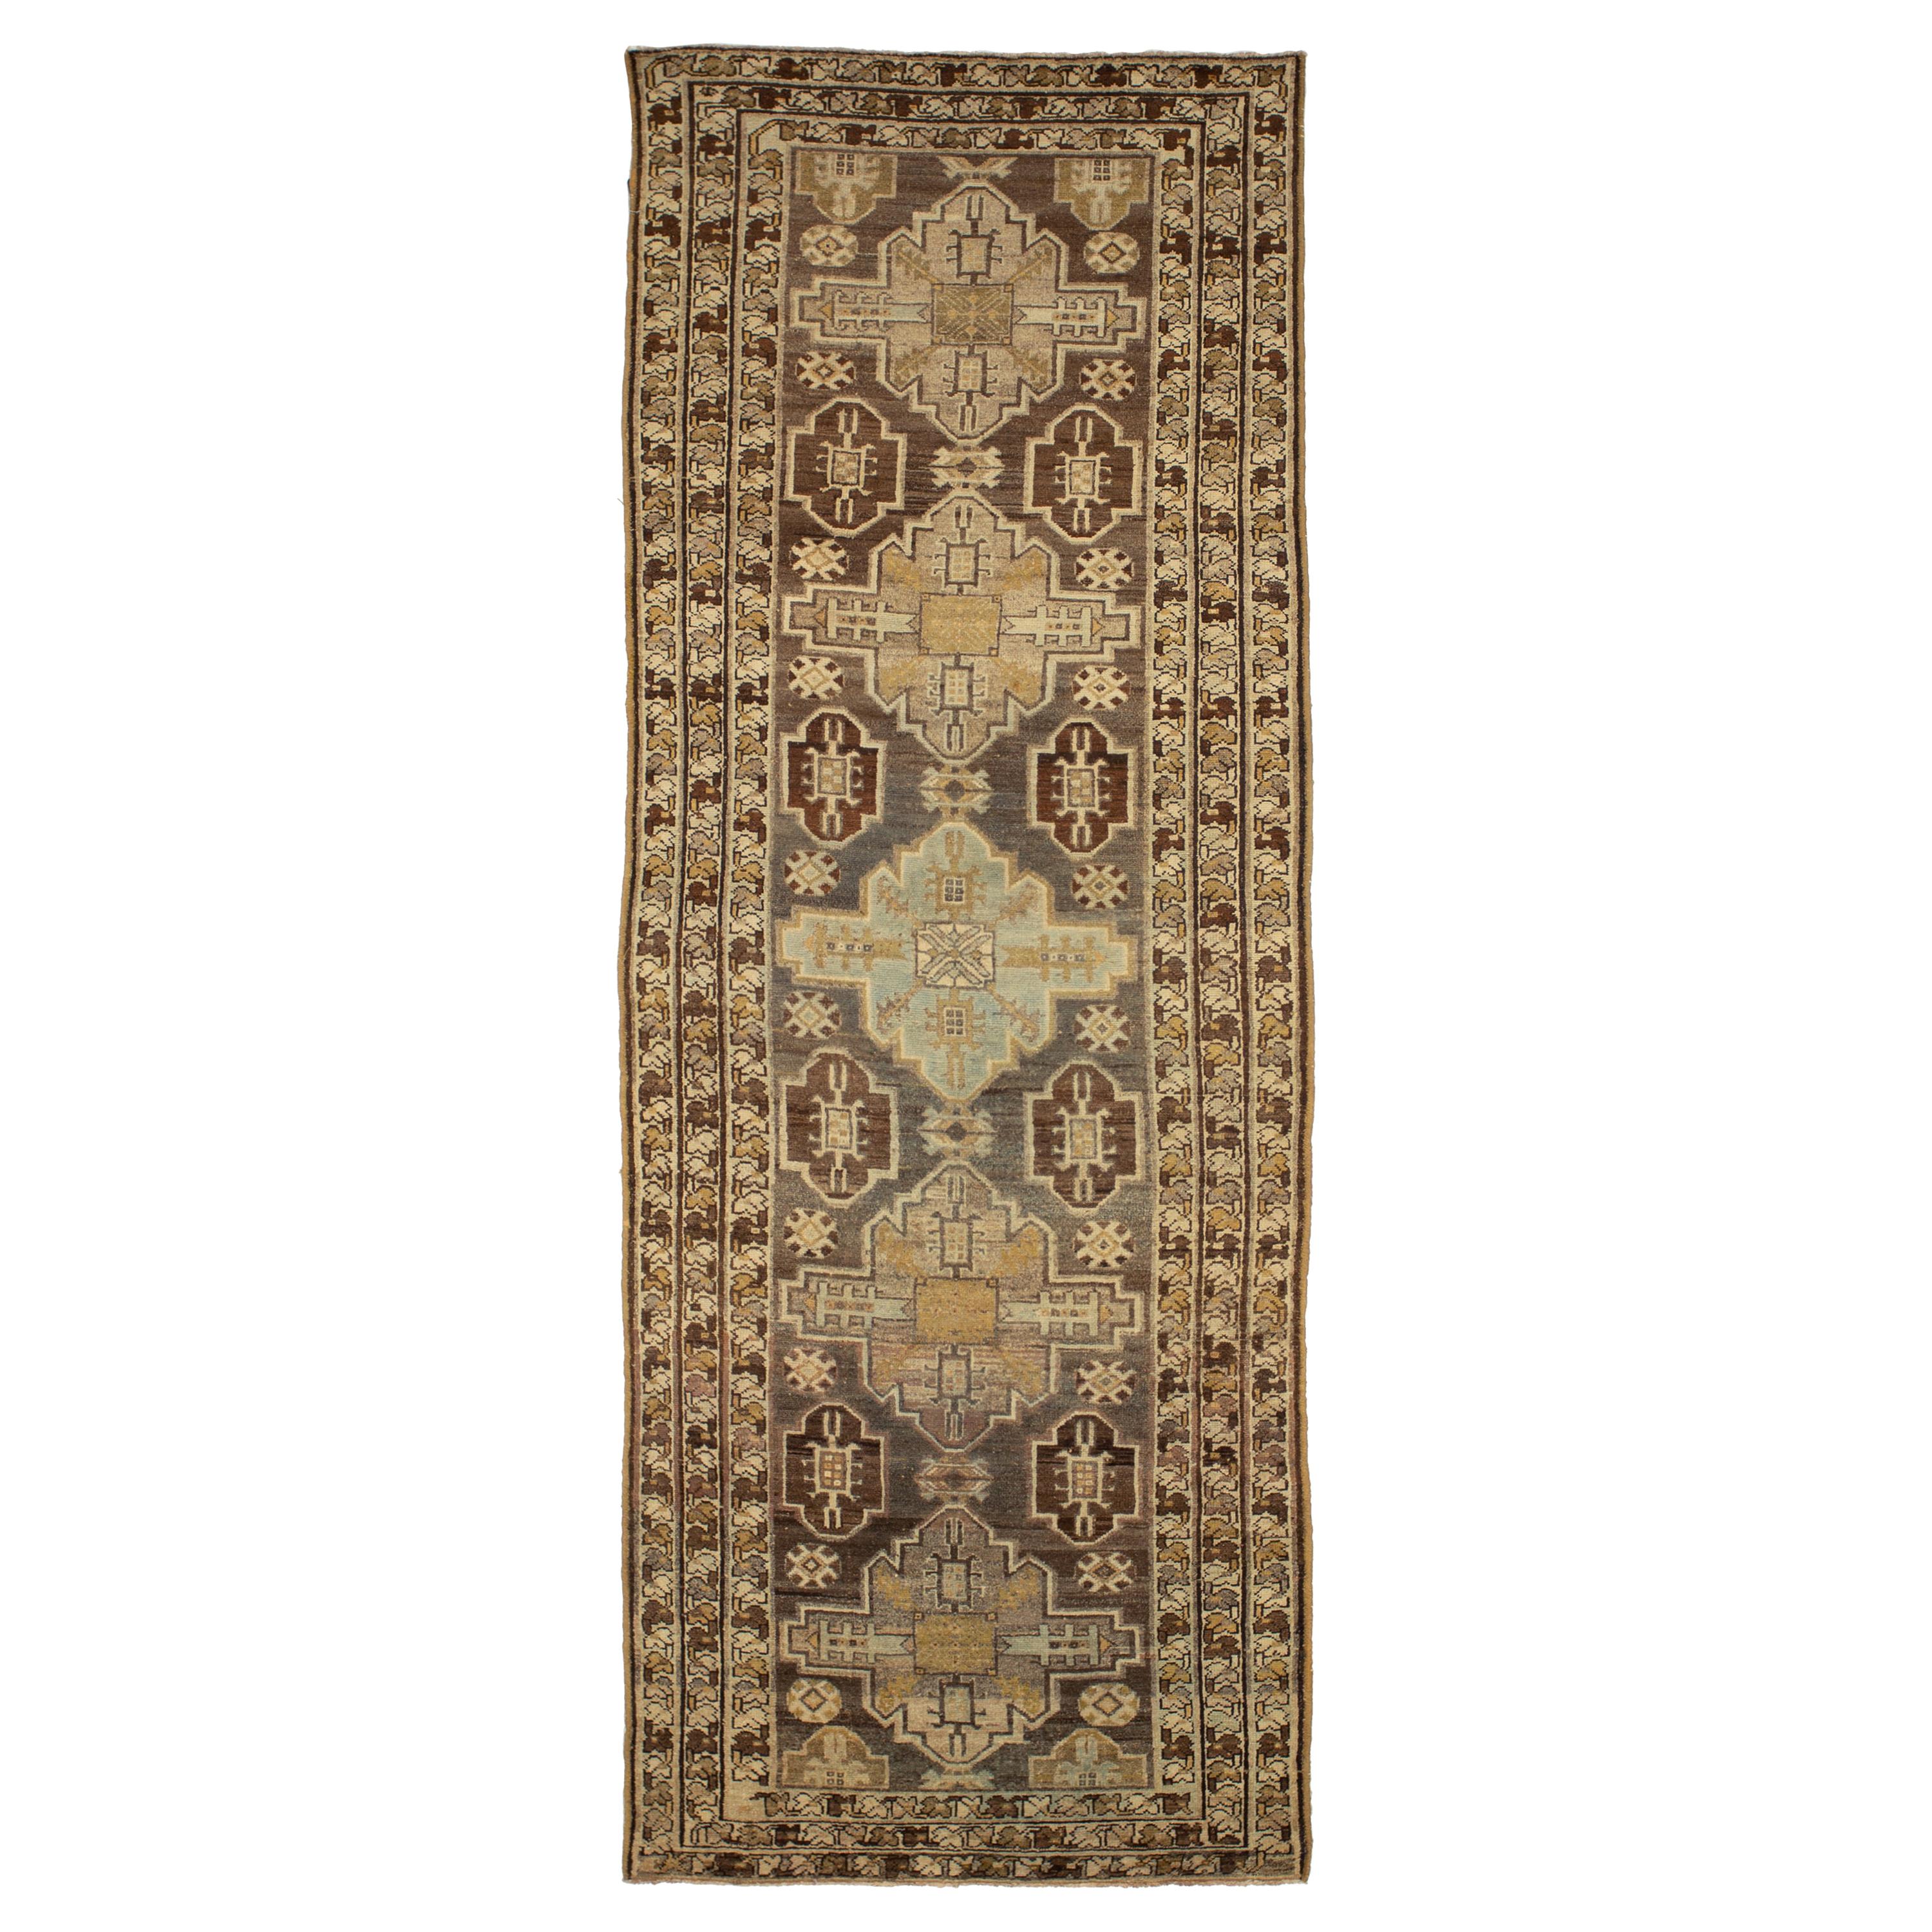 Antique Persian Saveh Runner Rug with Geometric & Tribal Design on a Brown Field